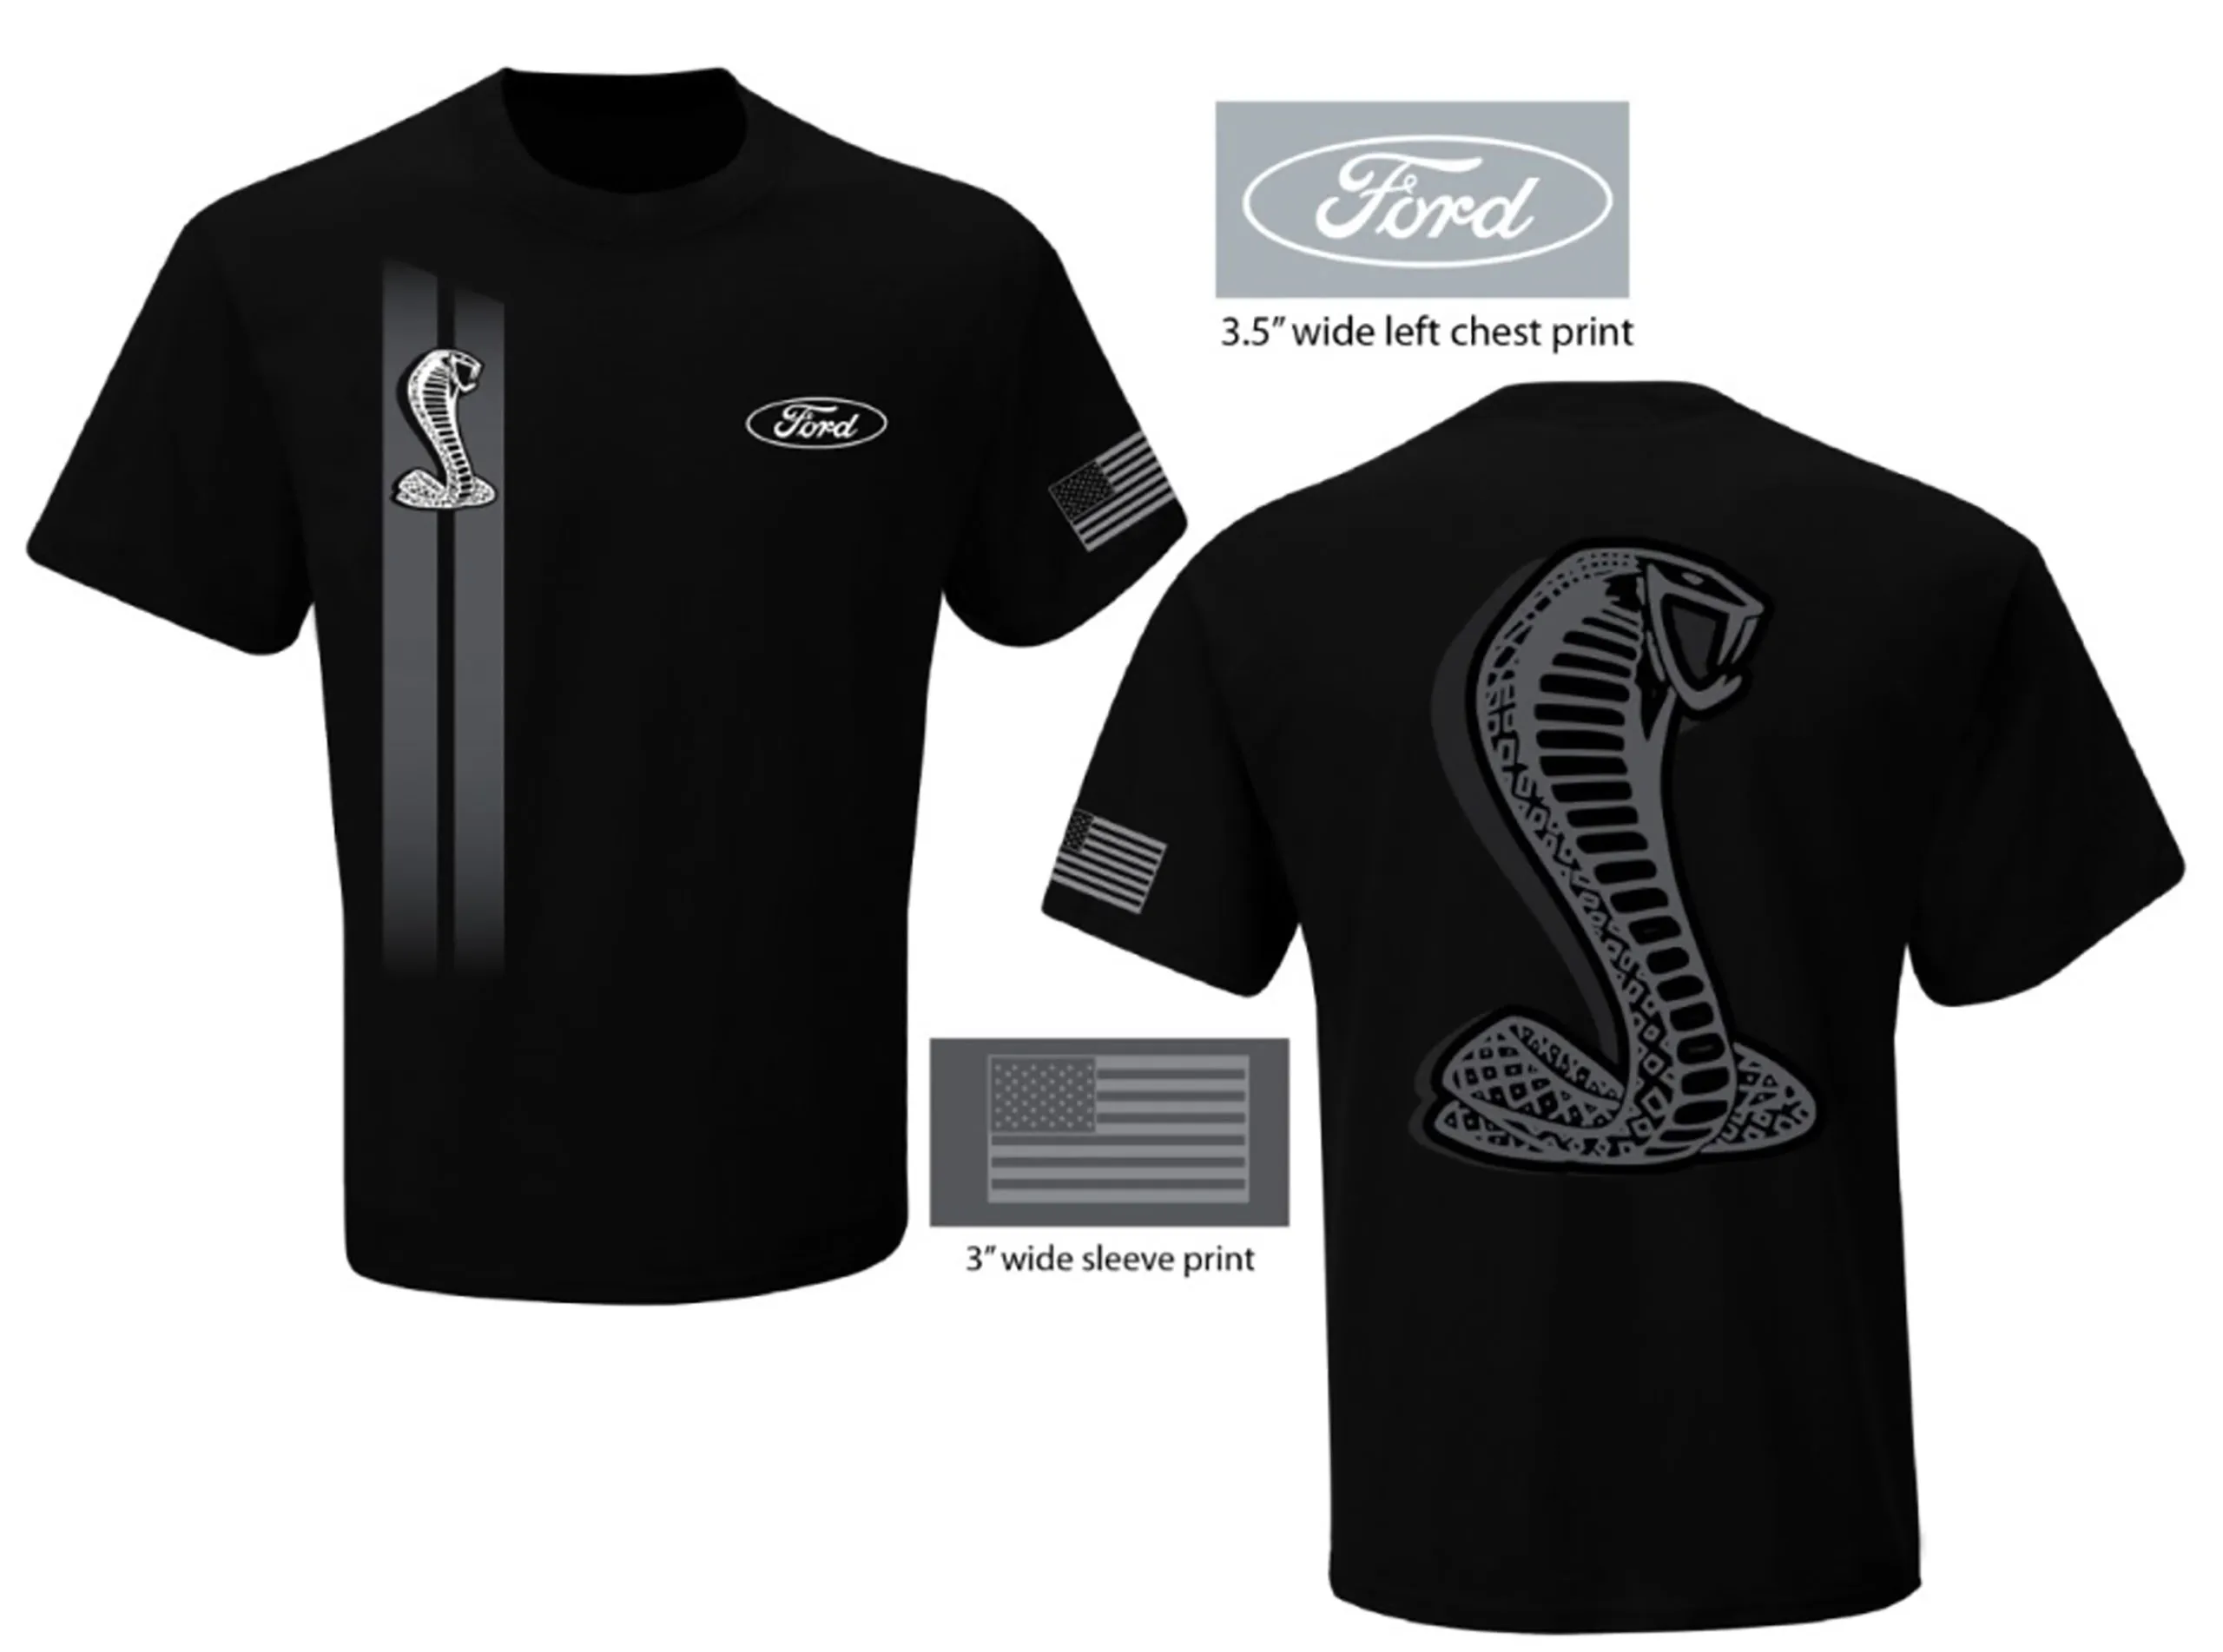 1964-2021 Ford Mustang T-Shirt - Black W/Cobra Emblem On Front & Back, Flag On Sleeve - 2XL - Auto Accessories of America